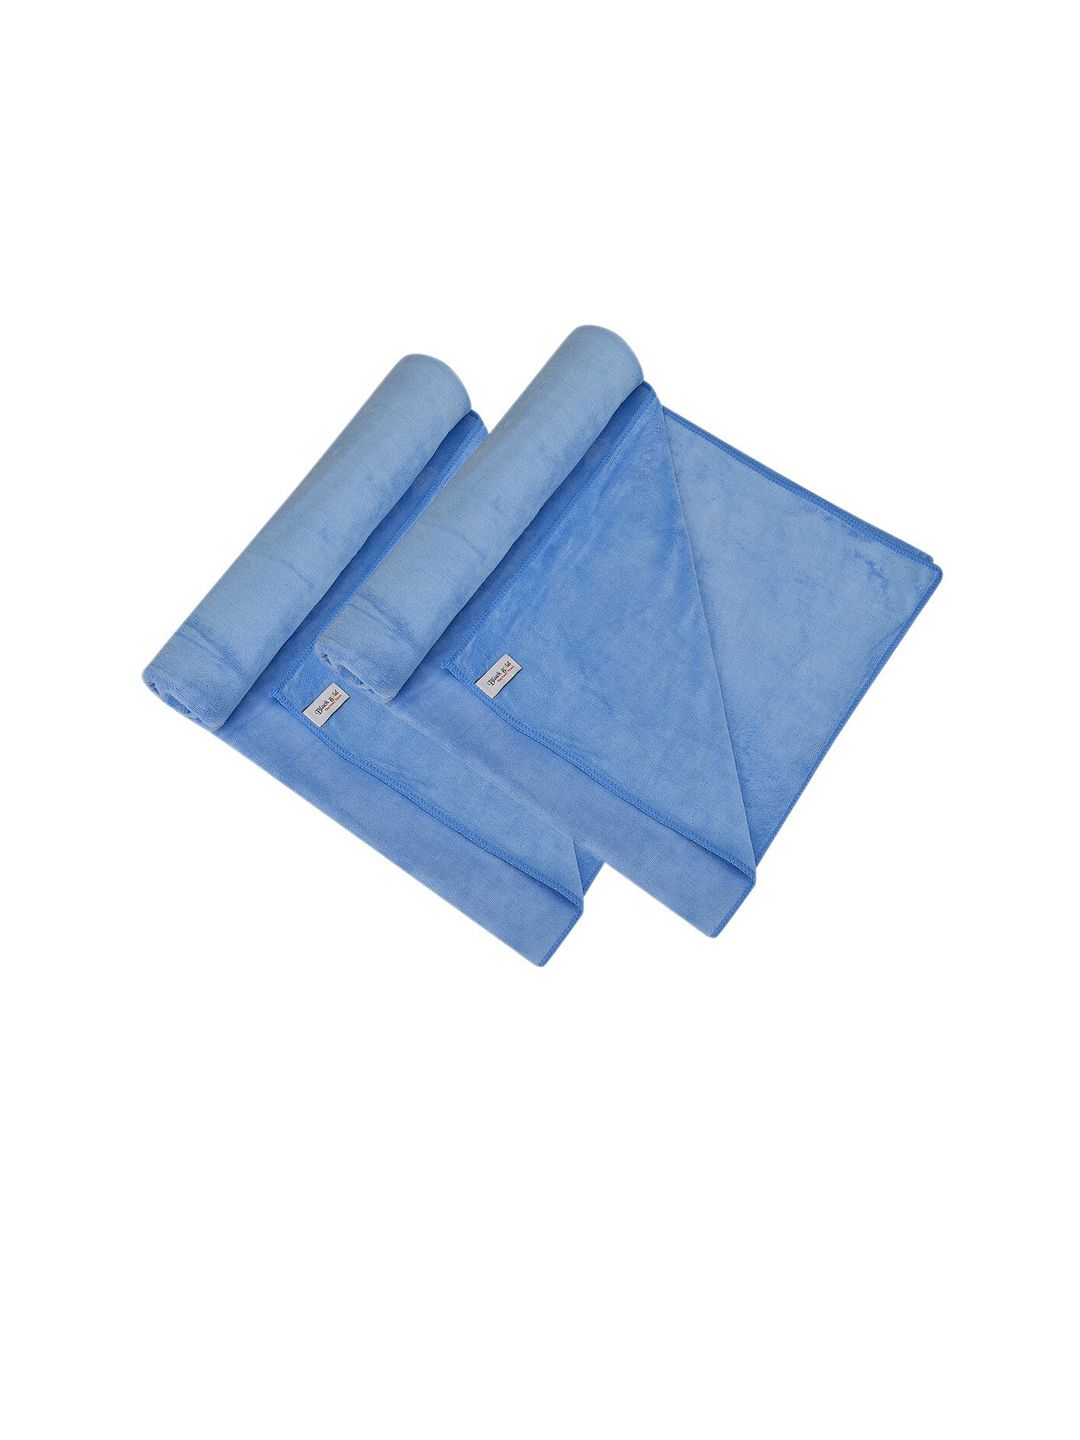 Black gold Set Of 2 Blue Solid 400 GSM Microfiber Bath Towels Price in India